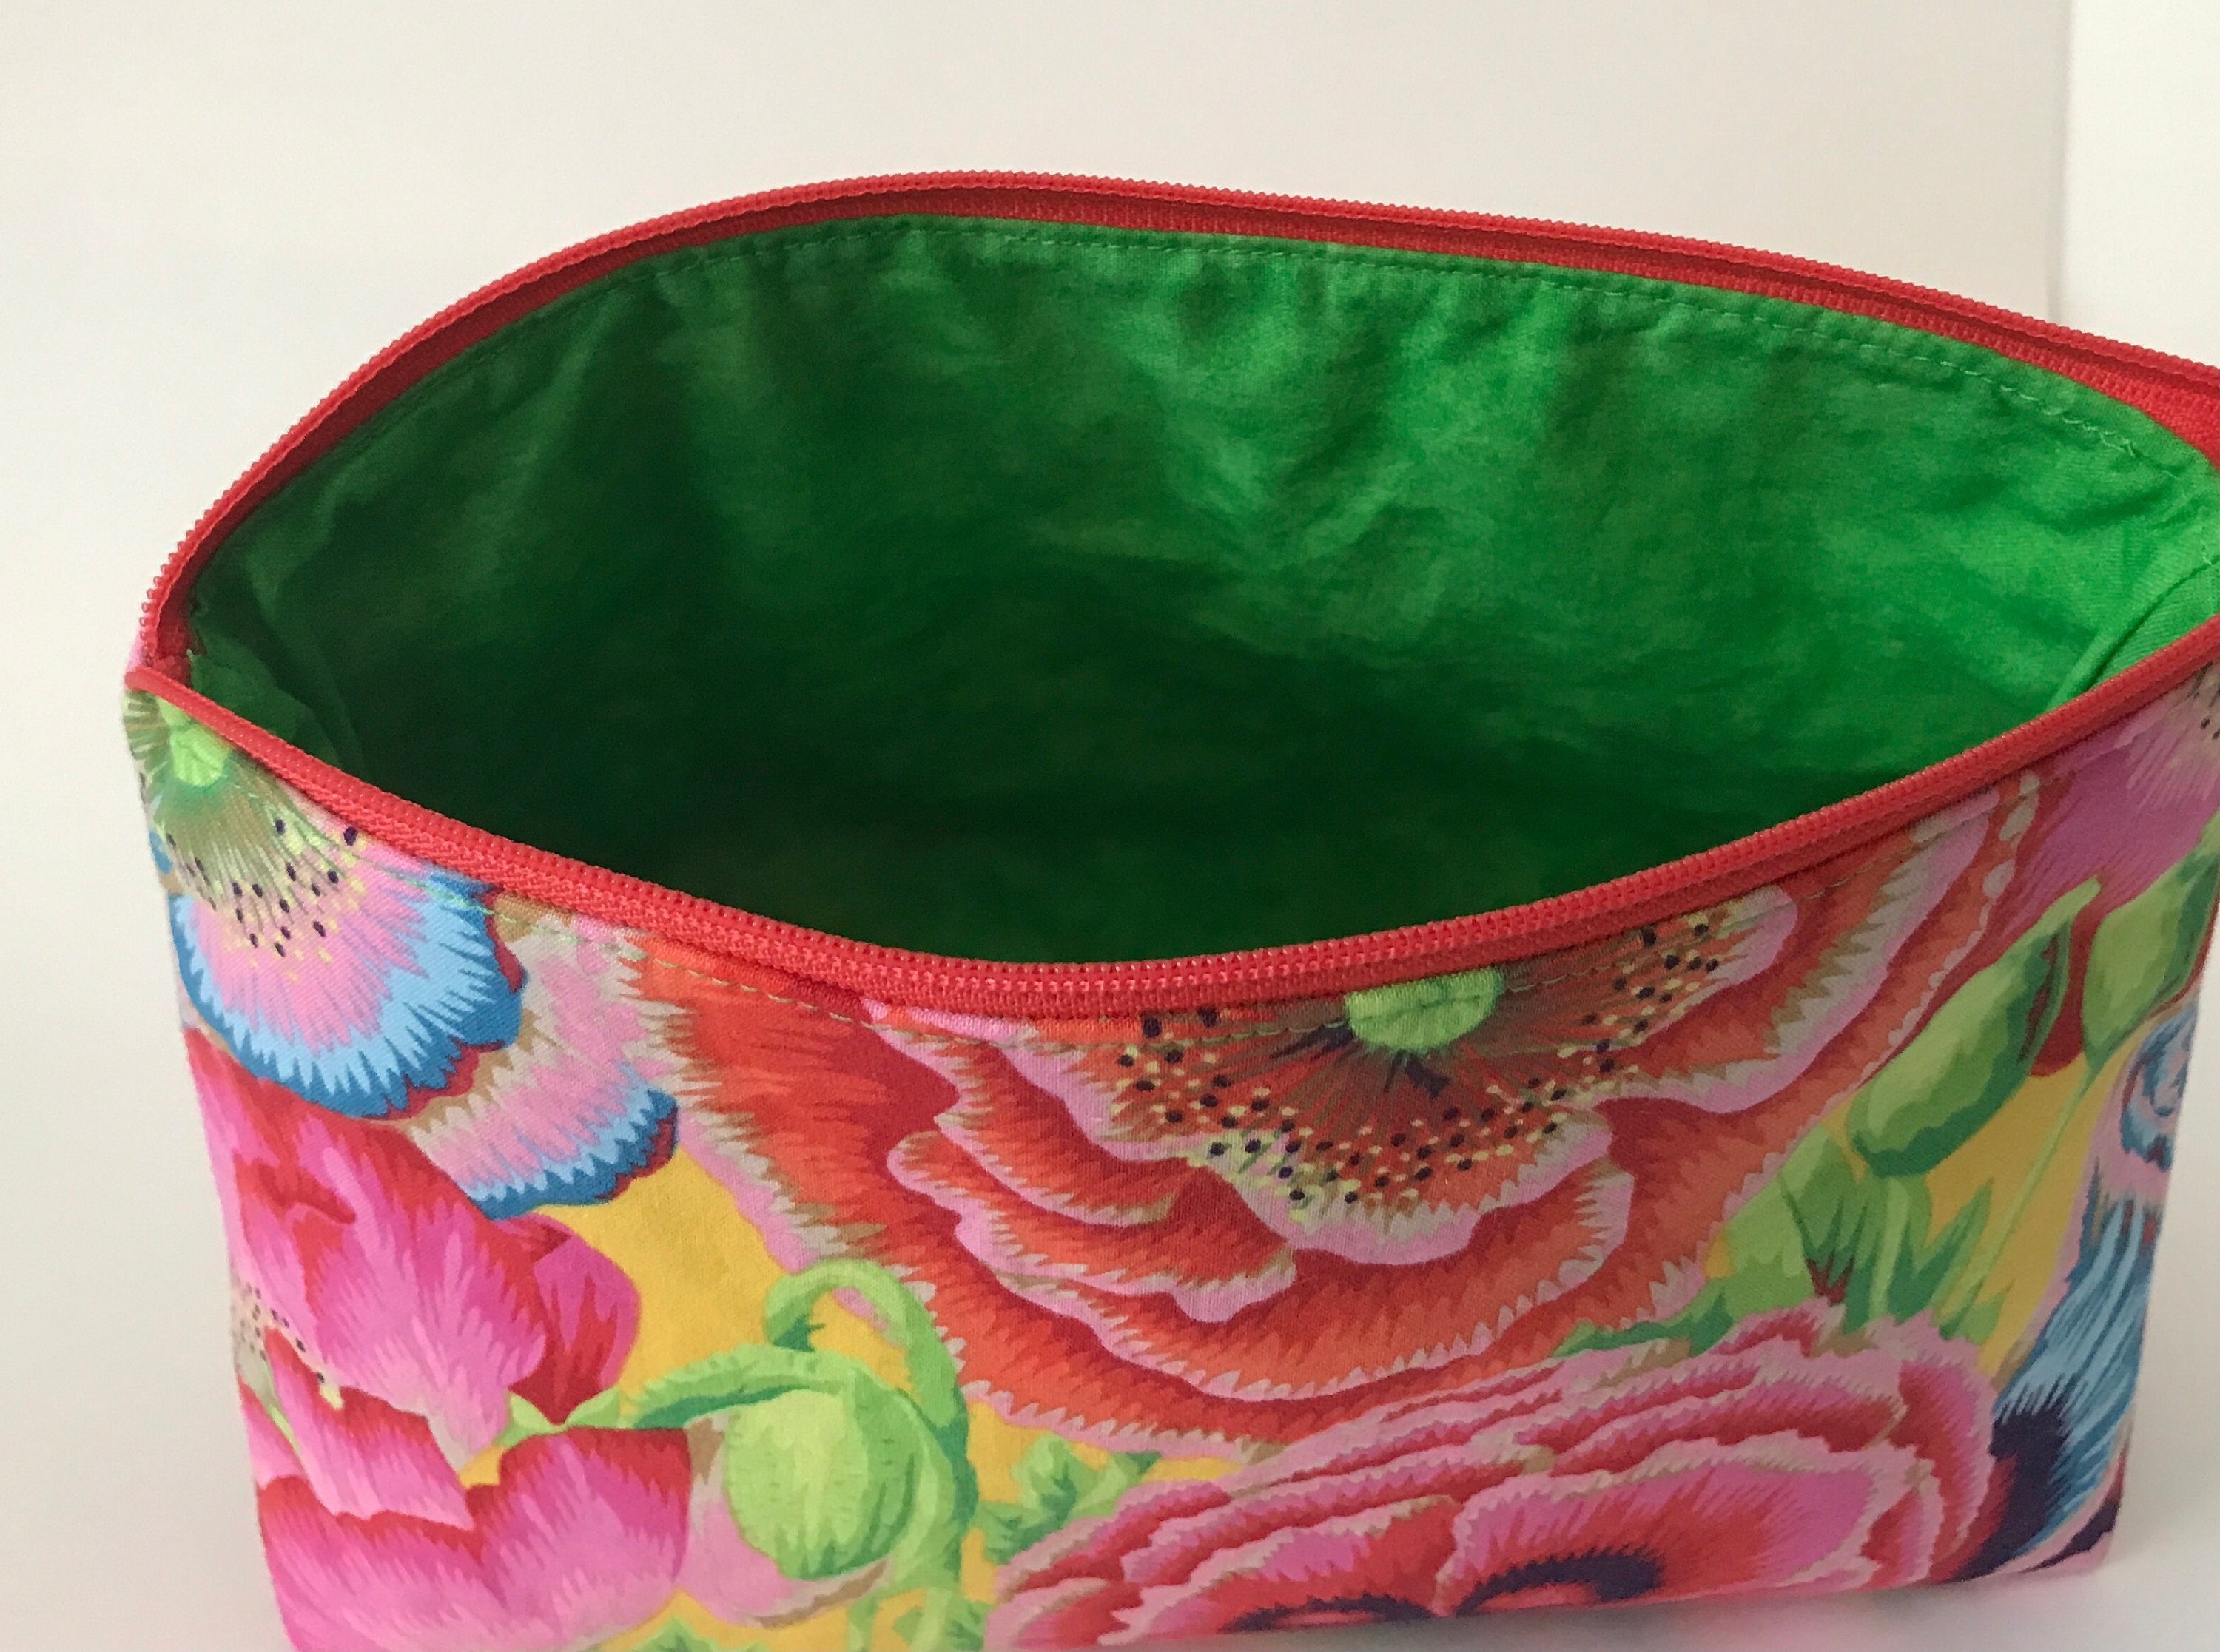 Colorful KAFFE FASSETT multicolored flowers cotton fabric Cosmetic Bag